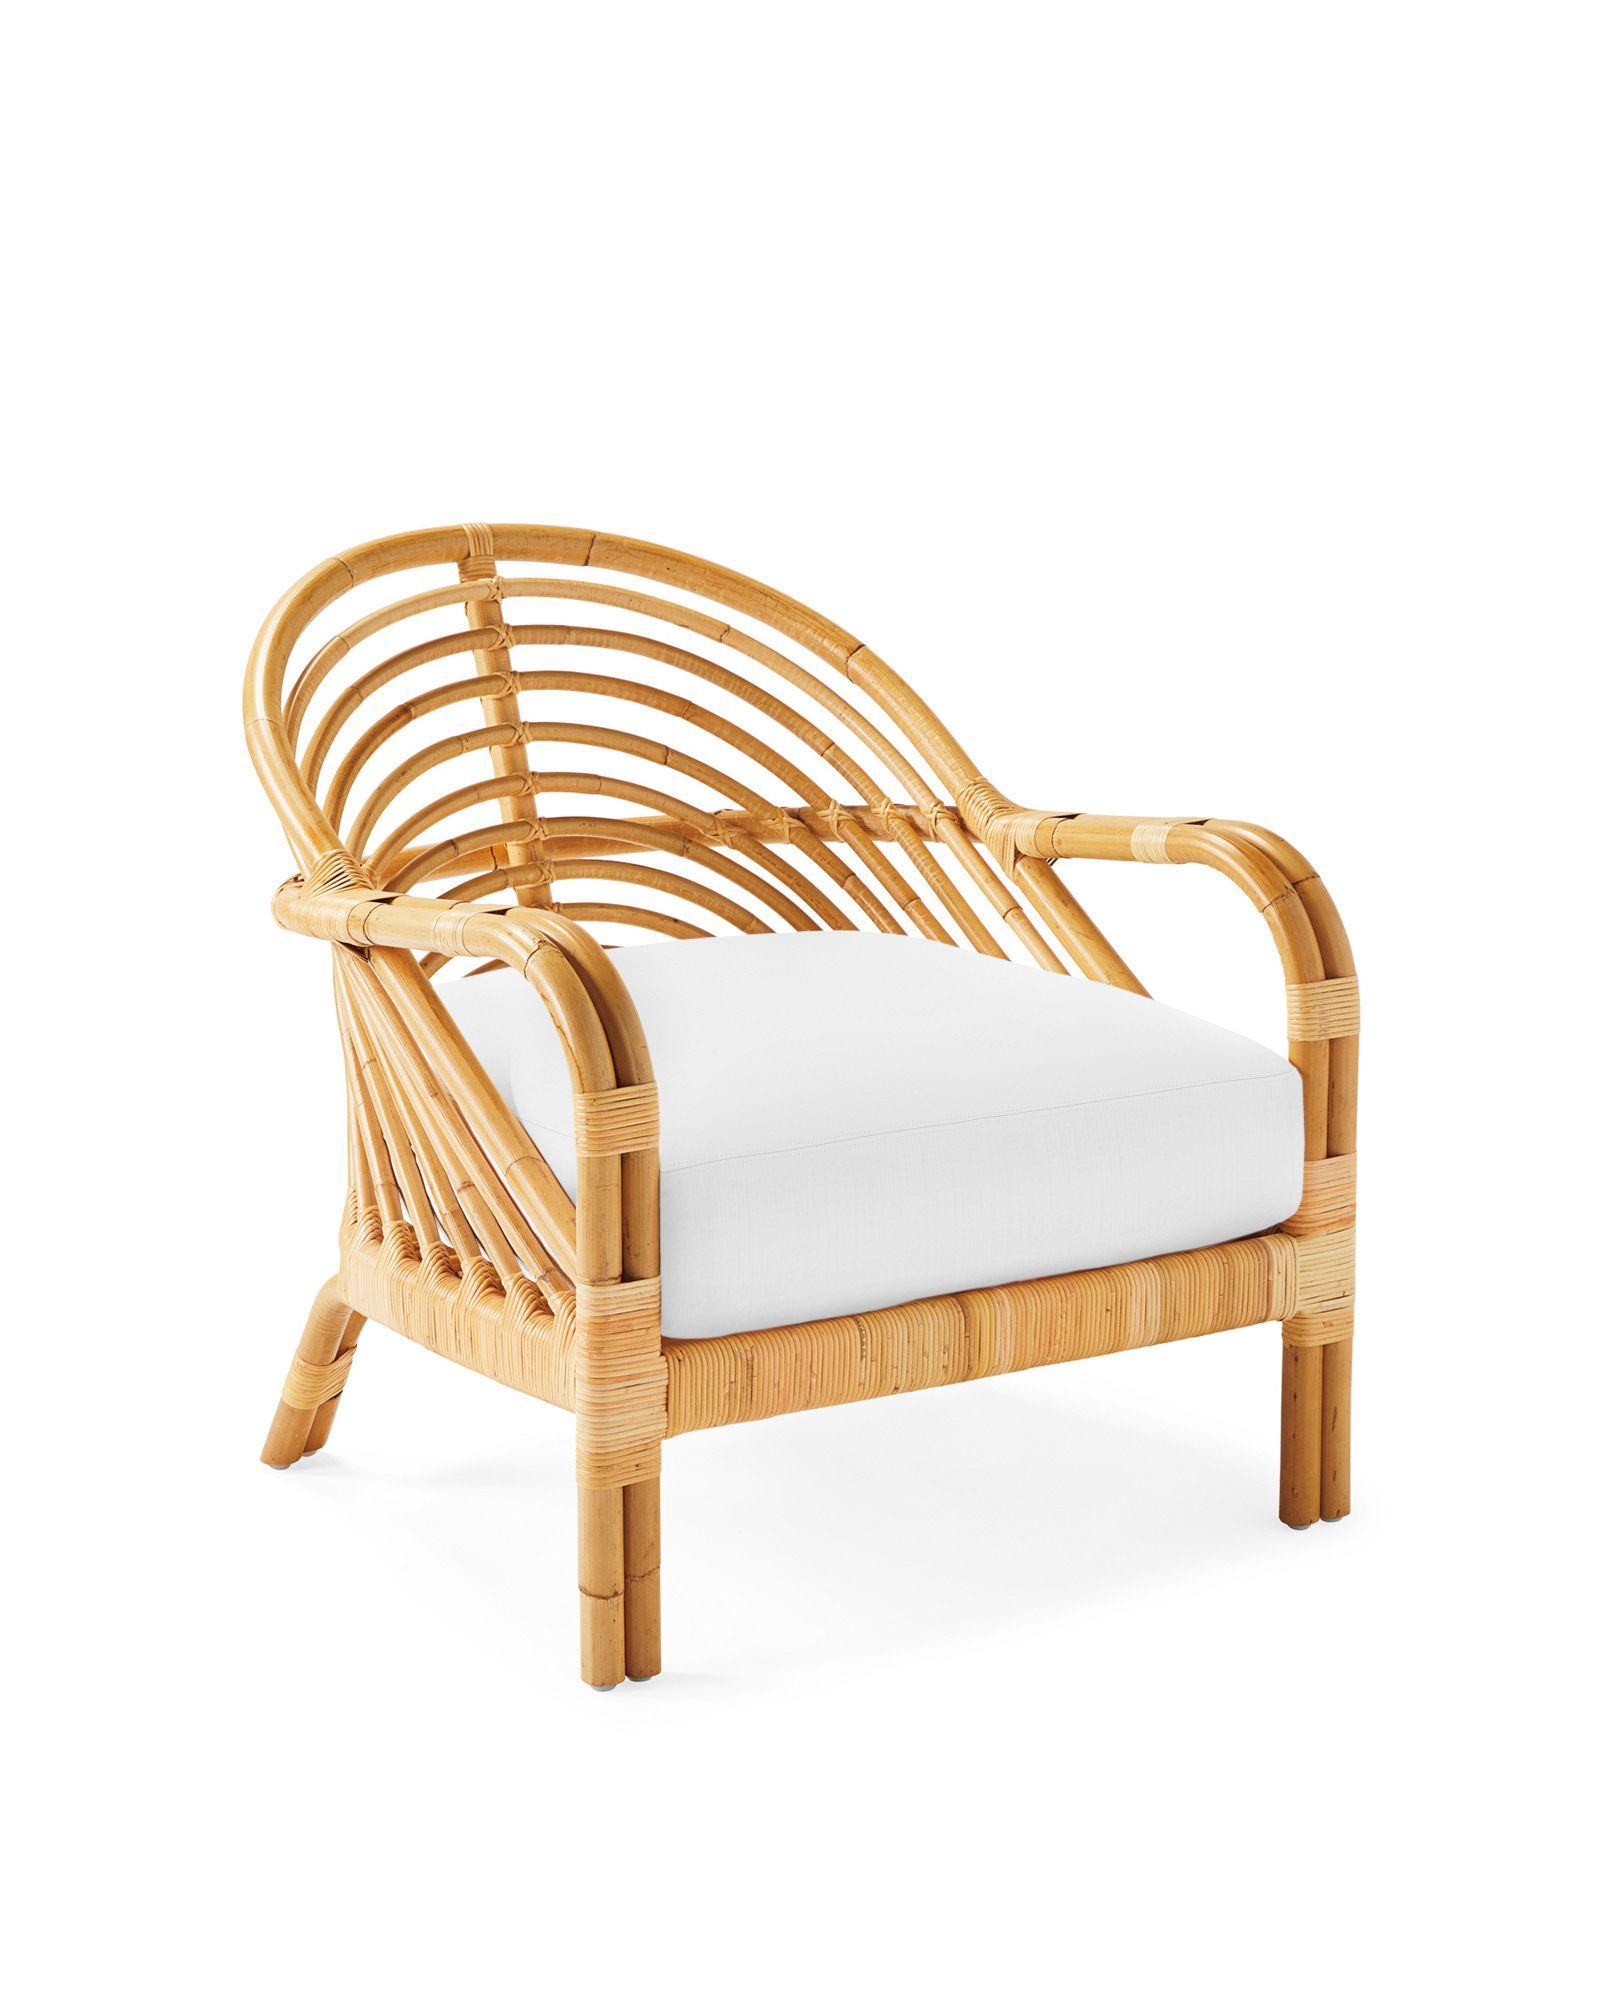 Edgewater Rattan Lounge Chair | Serena and Lily